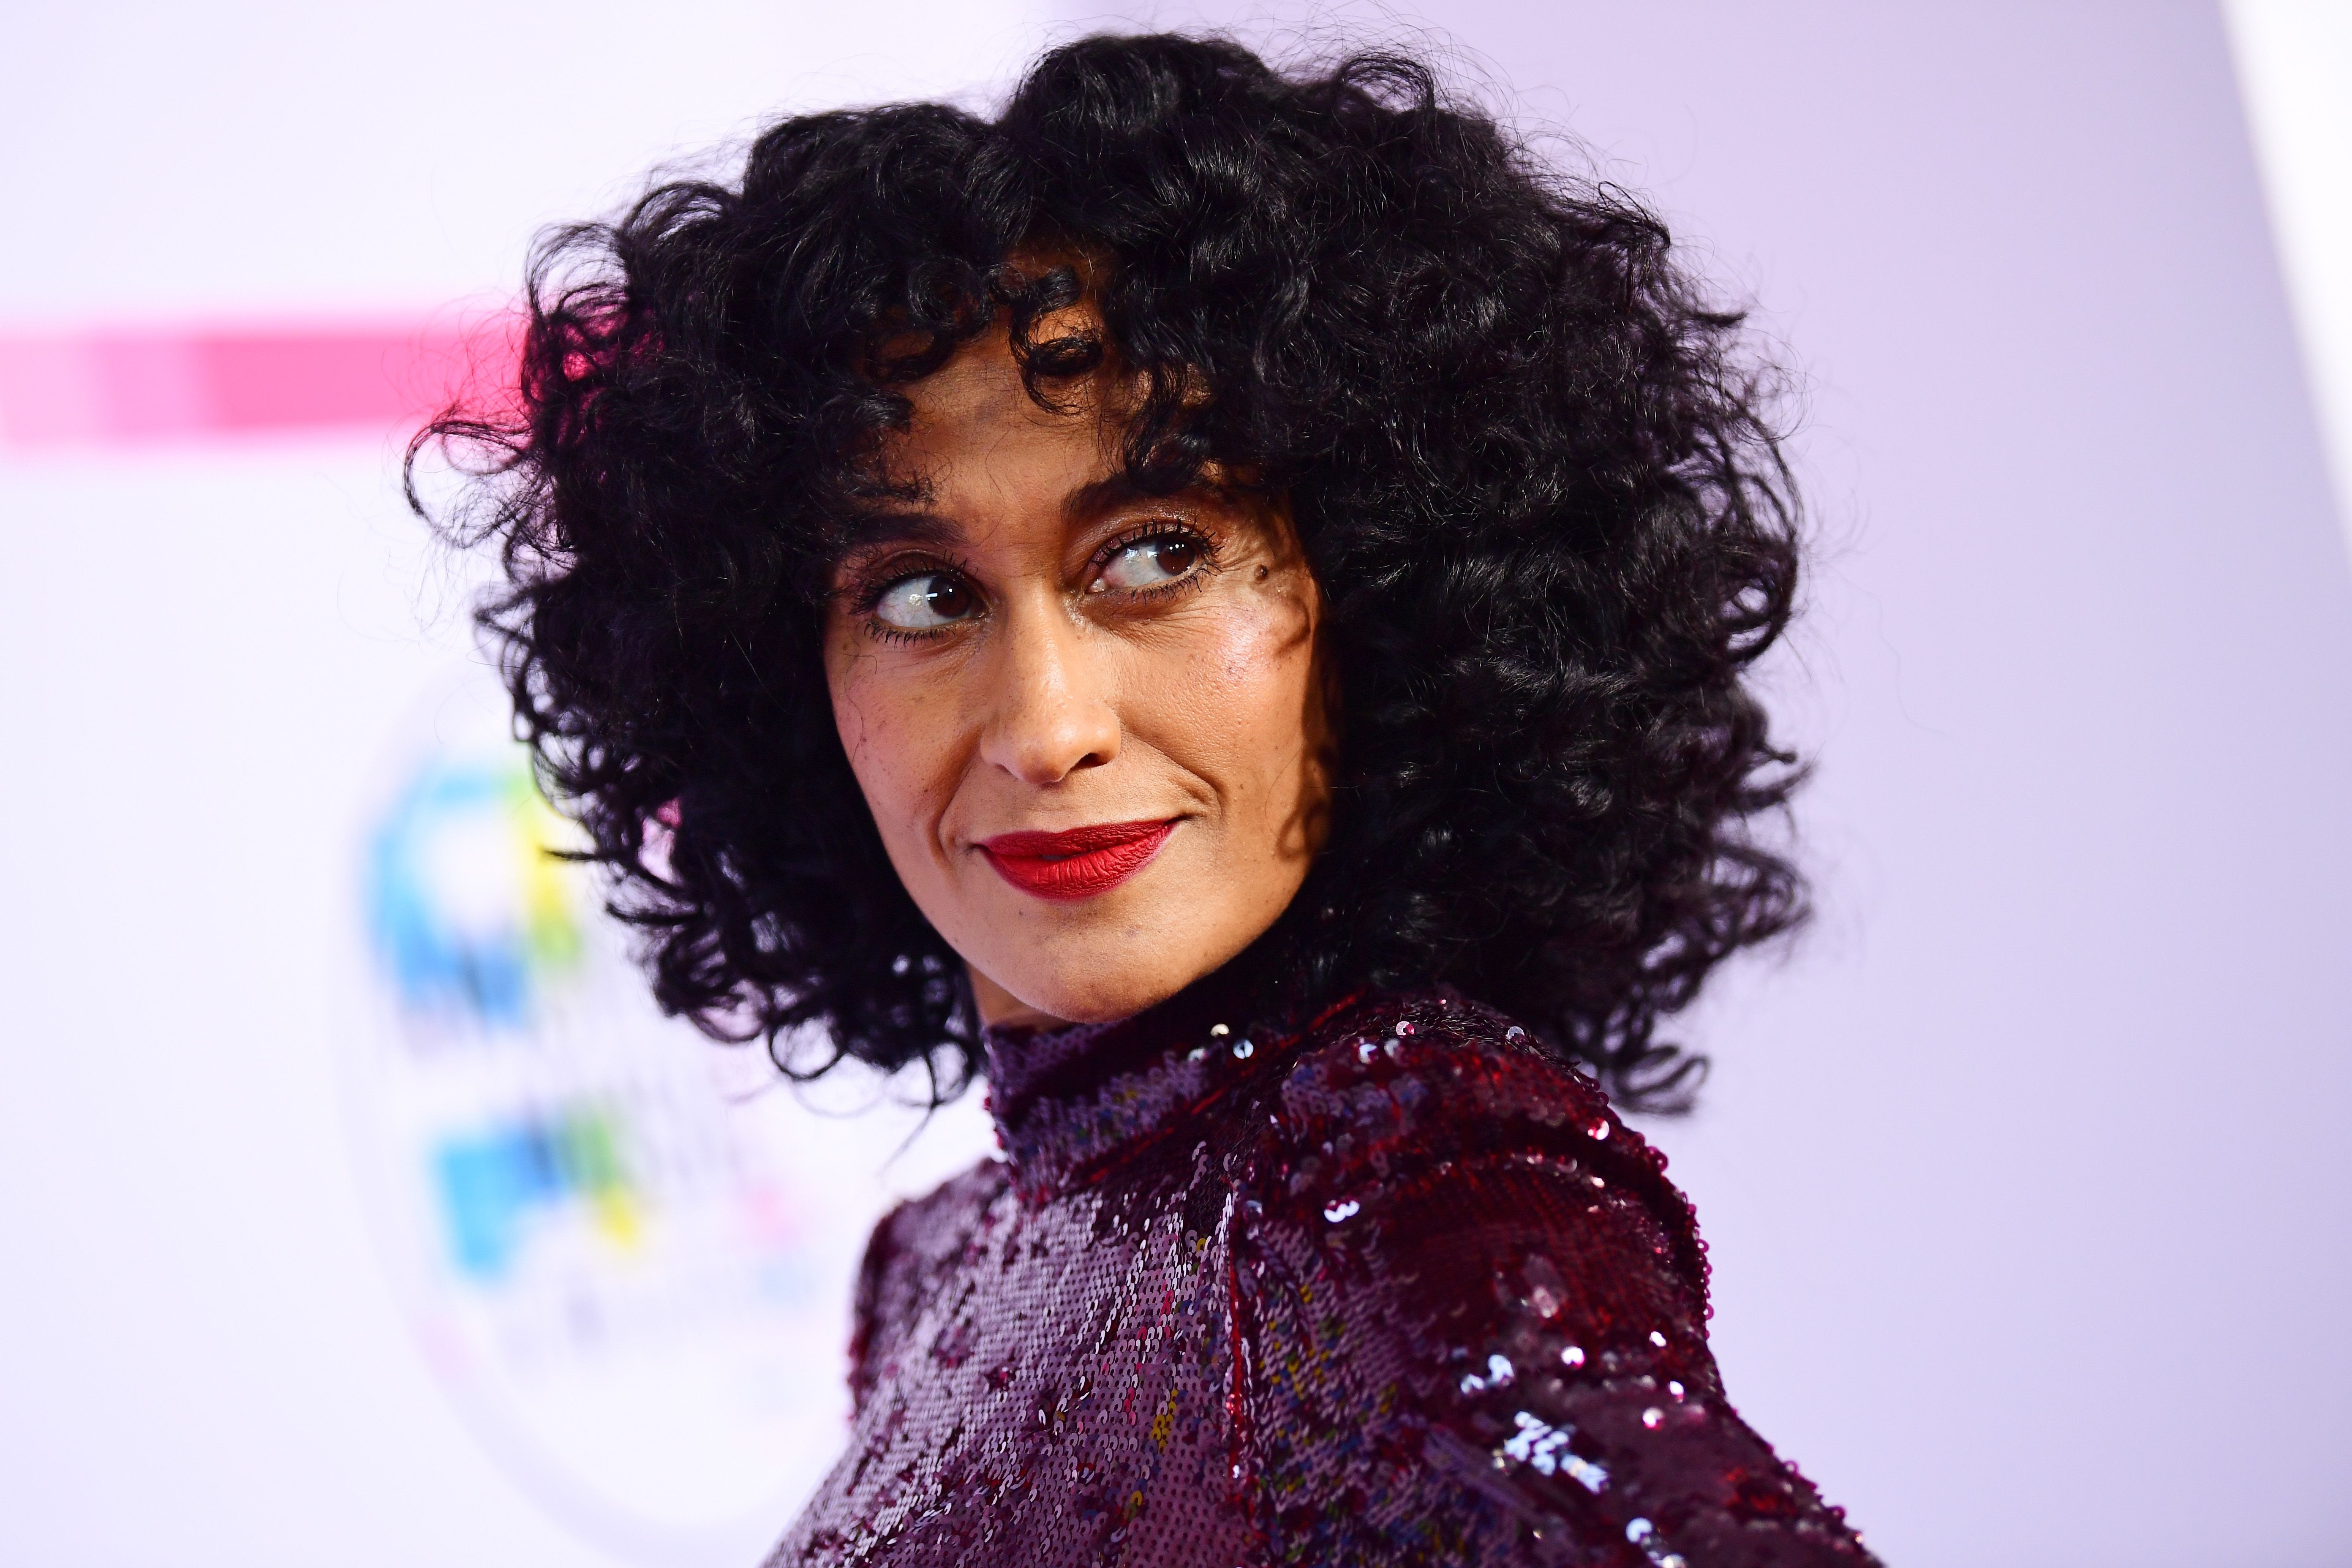 Tracee Ellis Ross attends the 2017 American Music Awards in Los Angeles, California. | Photo: Getty Images